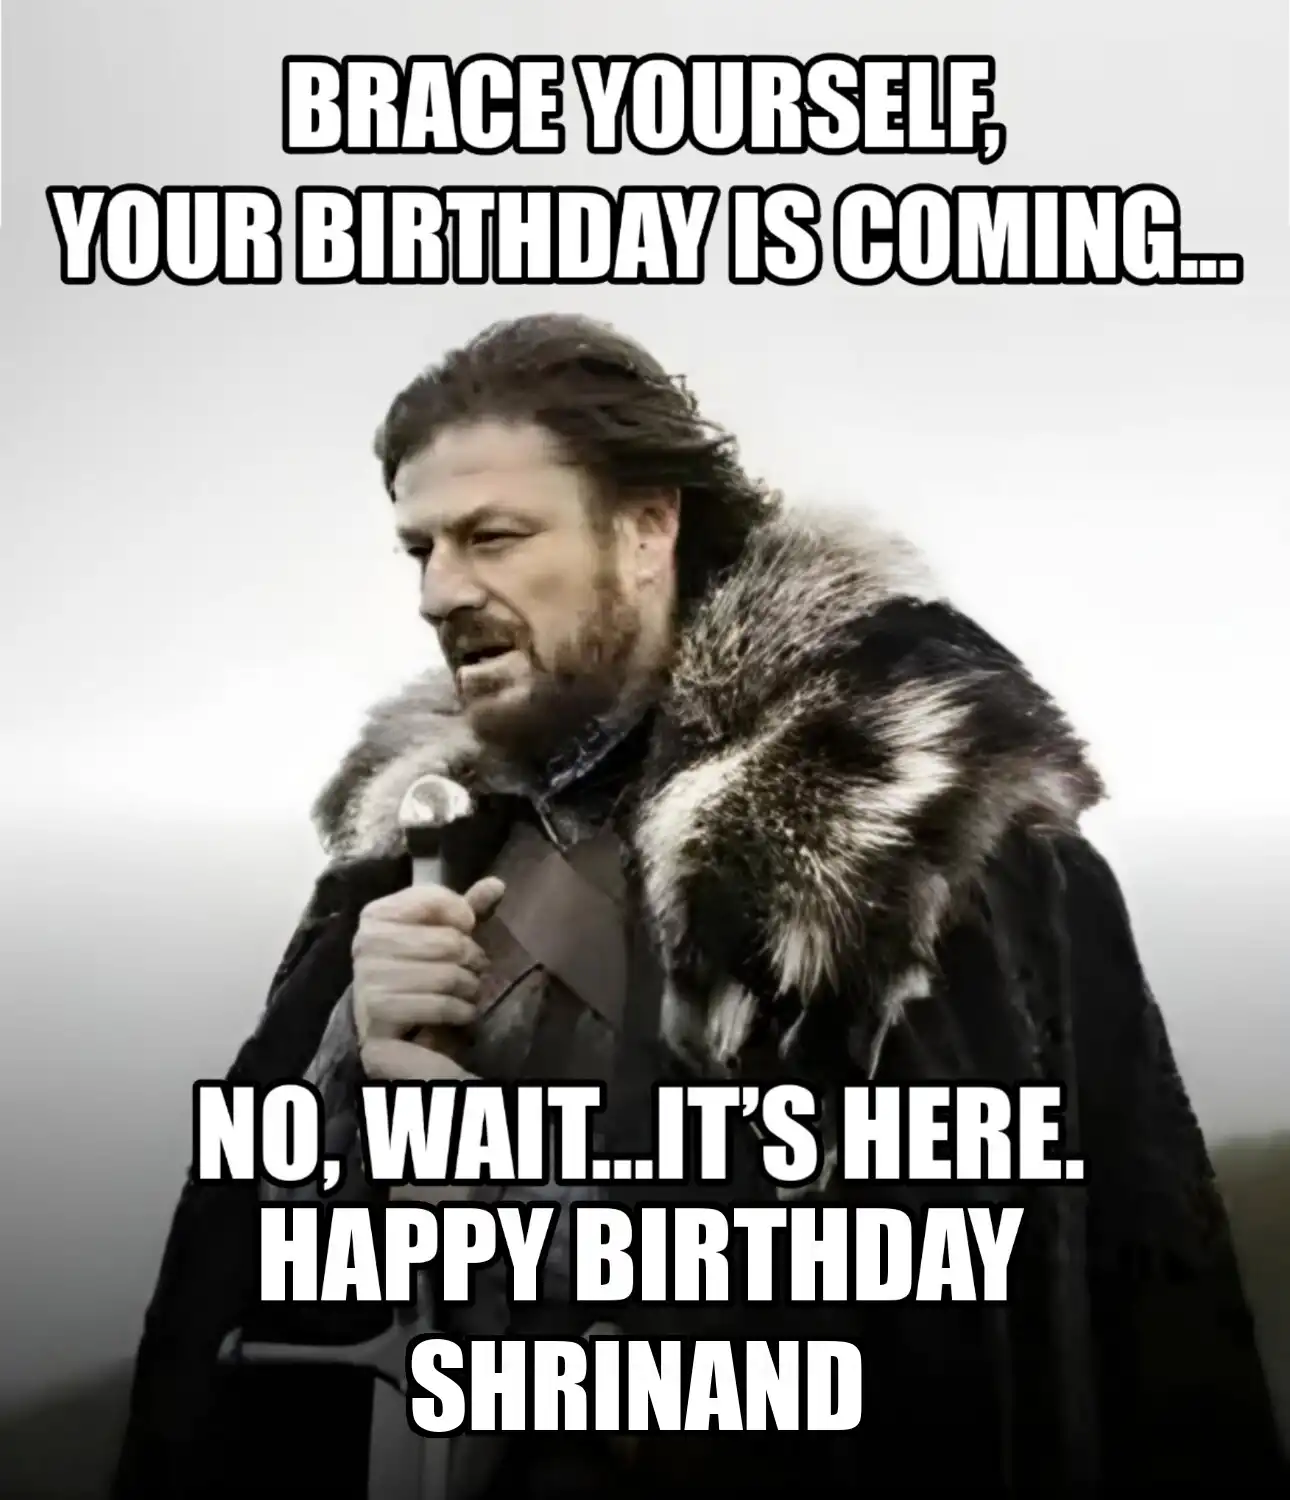 Happy Birthday Shrinand Brace Yourself Your Birthday Is Coming Meme